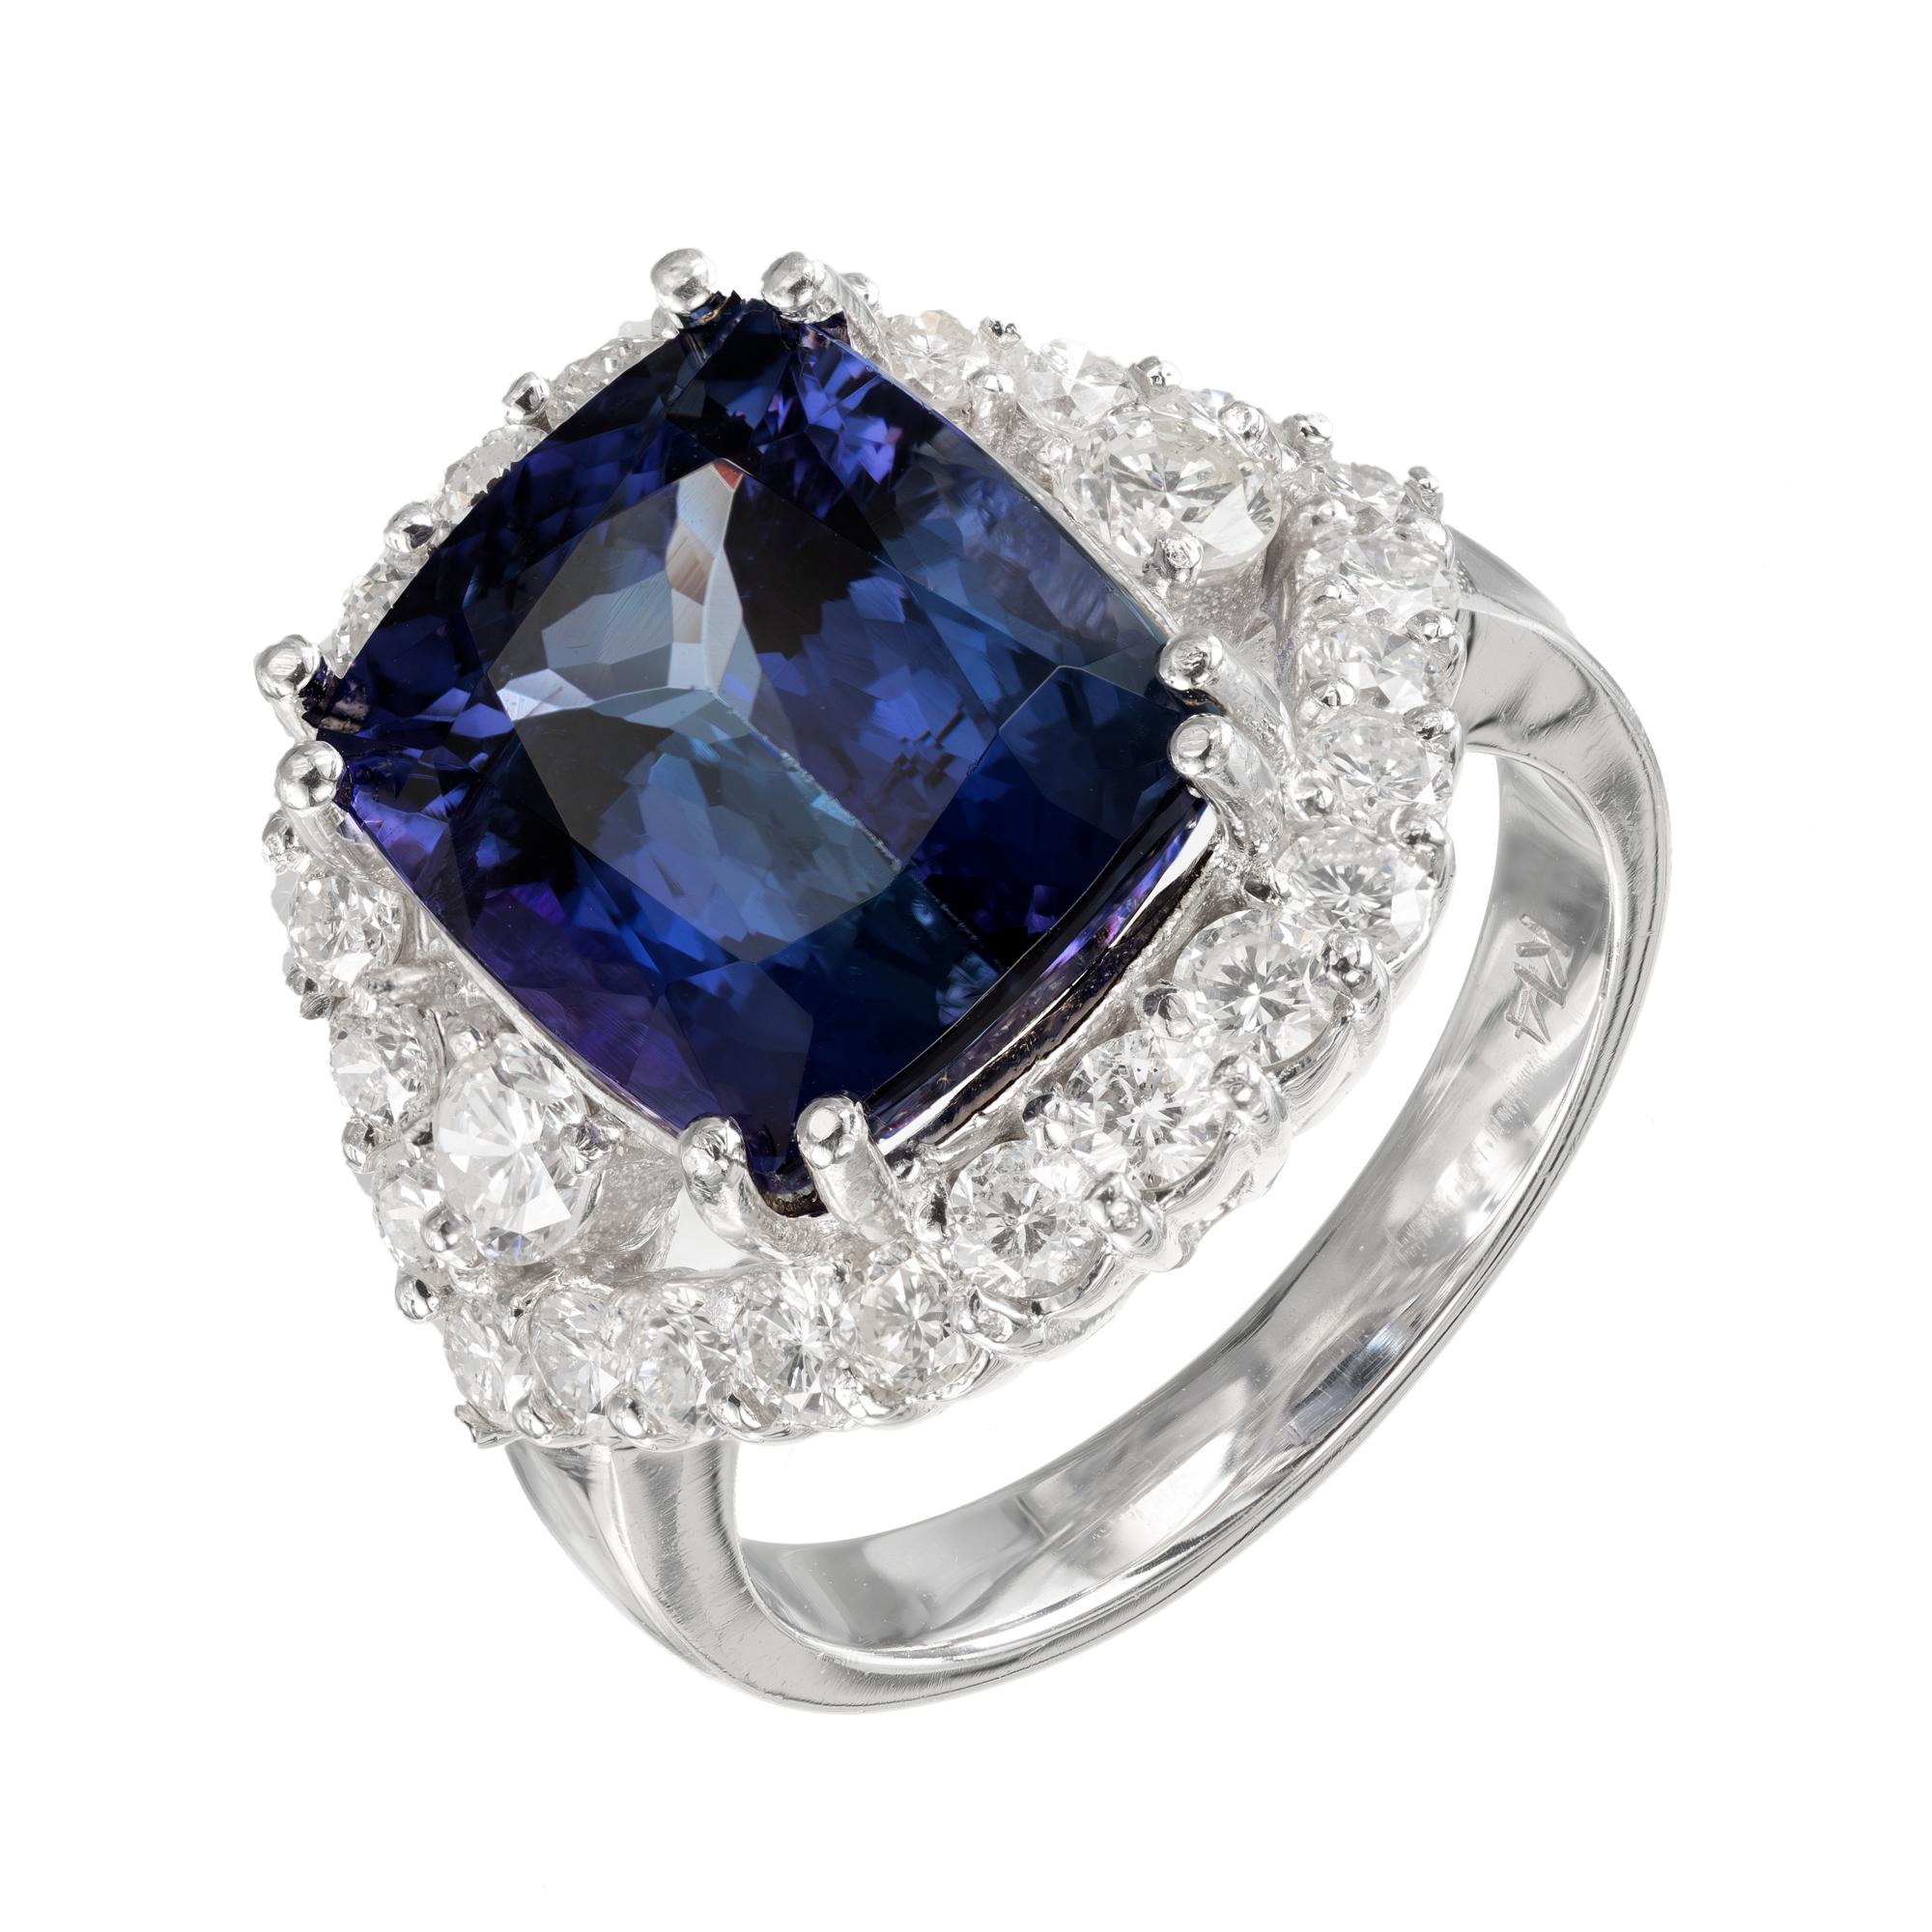 GIA certified blue-violet tanzanite and diamond halo cocktail ring. Cushion cut center stone with a split halo of round brilliant cut diamonds in a 14 white gold setting. 

1 cushion cut blue-violet SI tanzanite, Approximate 7.27cts GIA Certificate